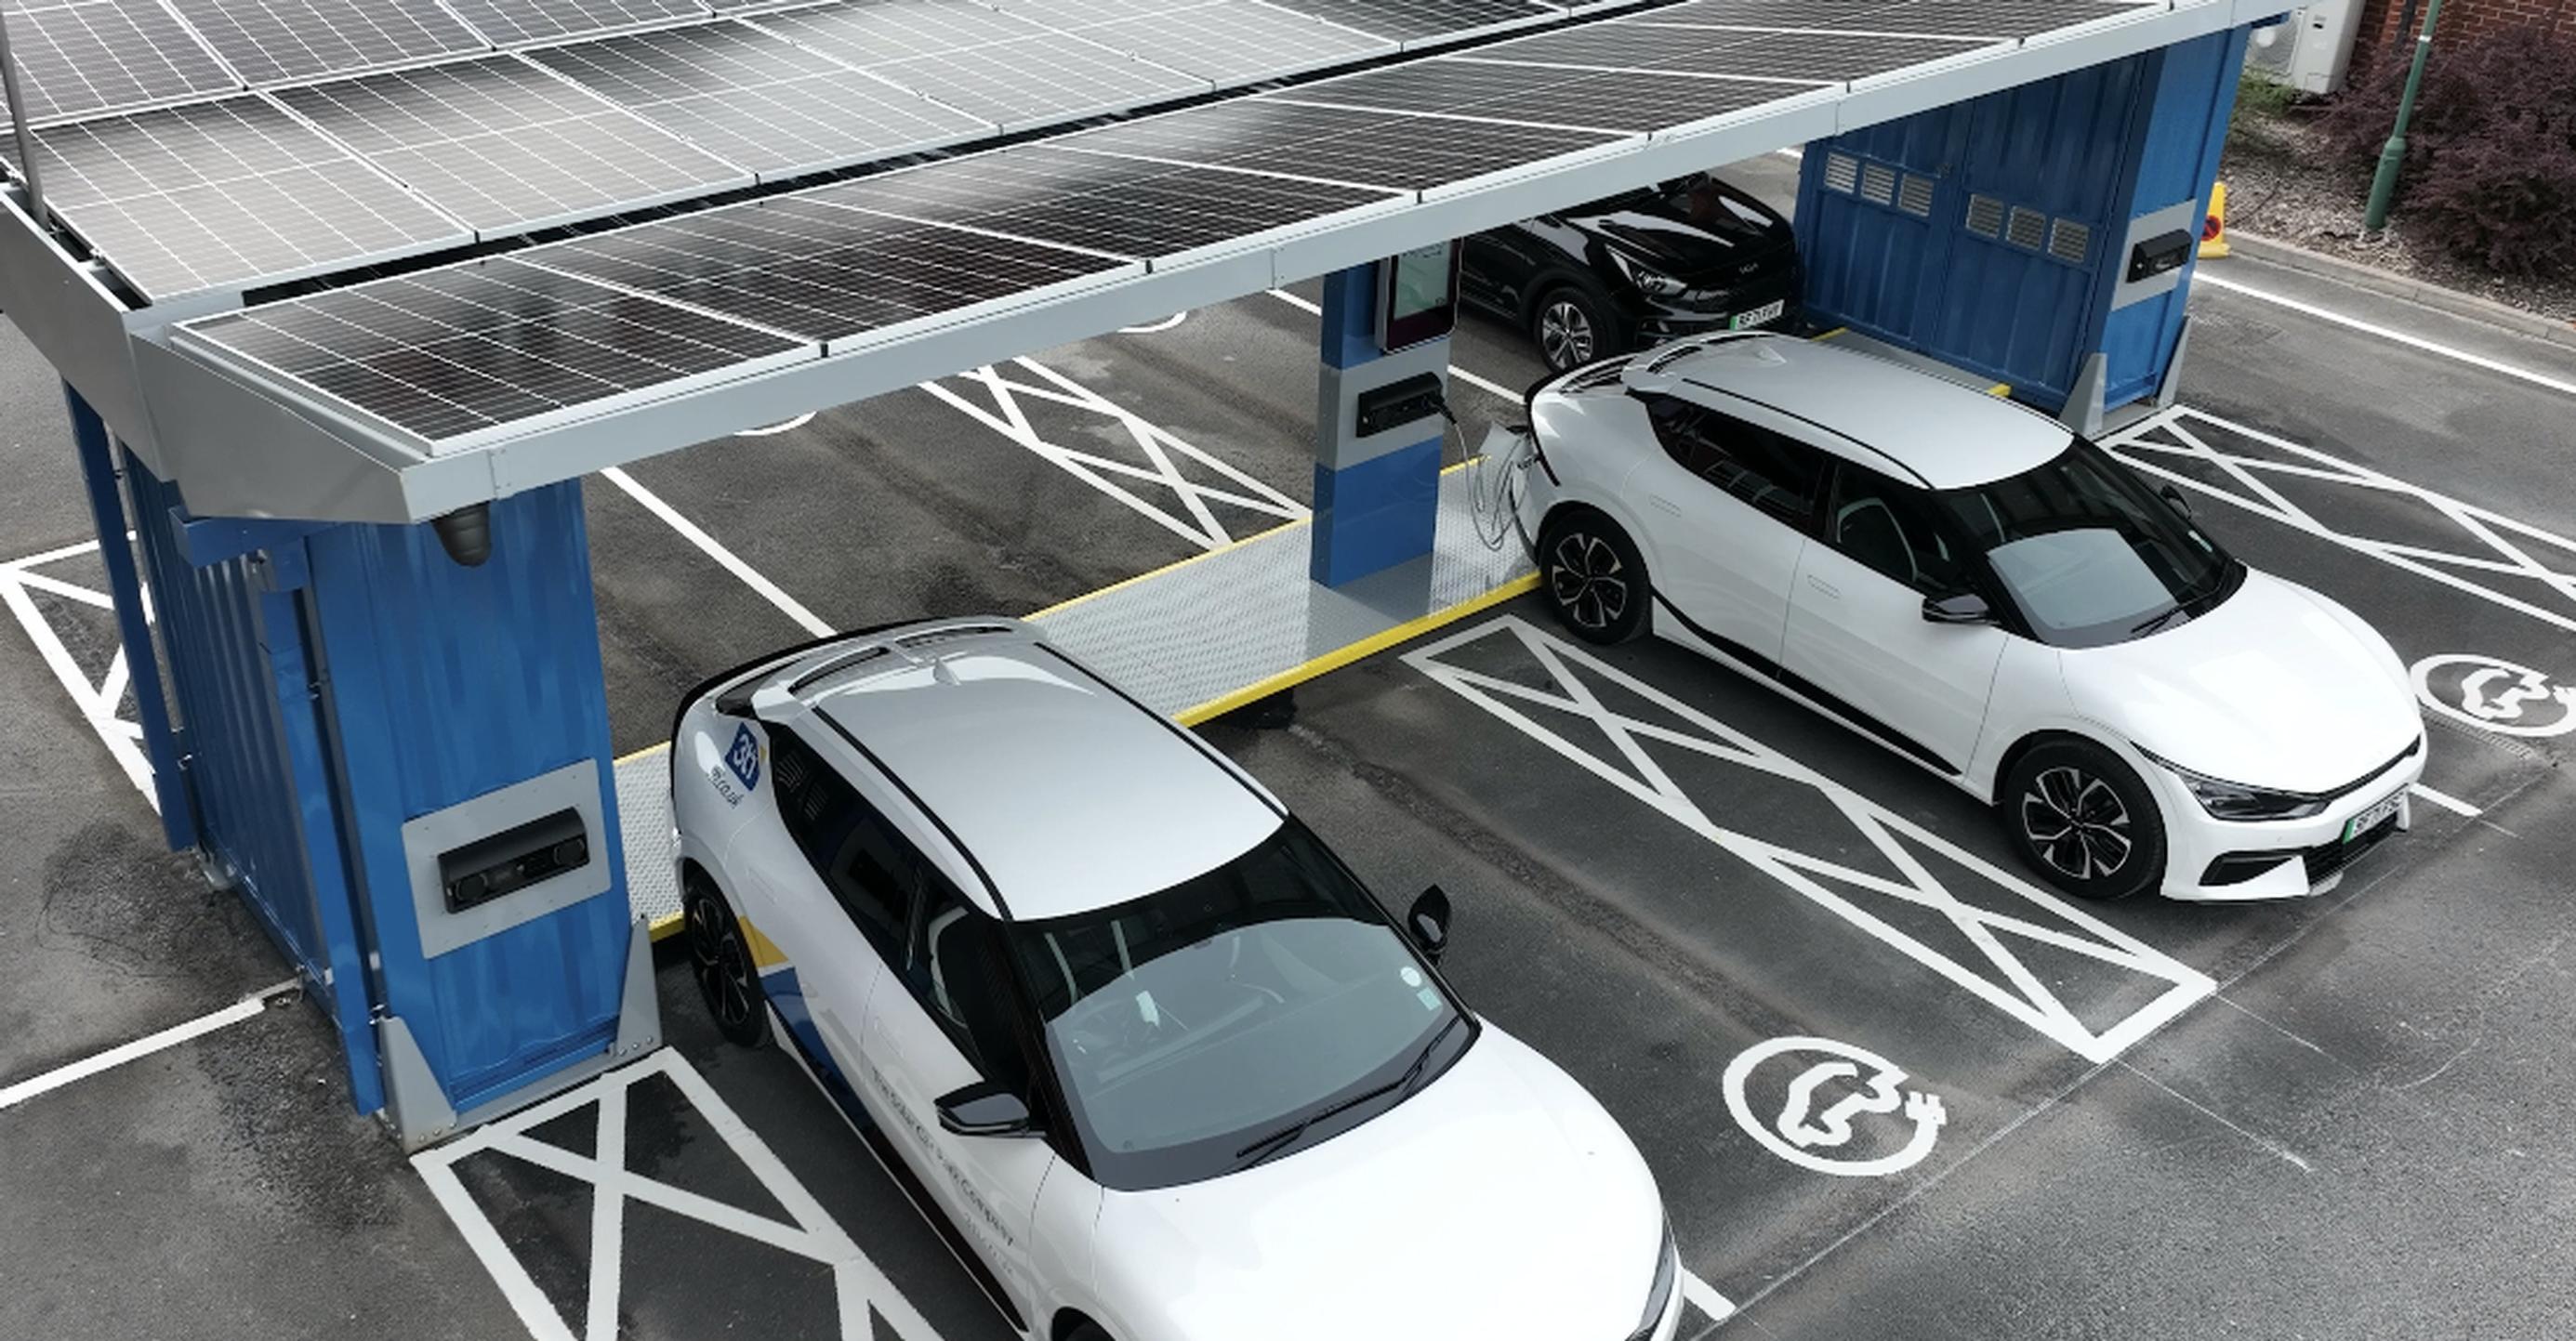 The Papilio3 solar car port with EV charging